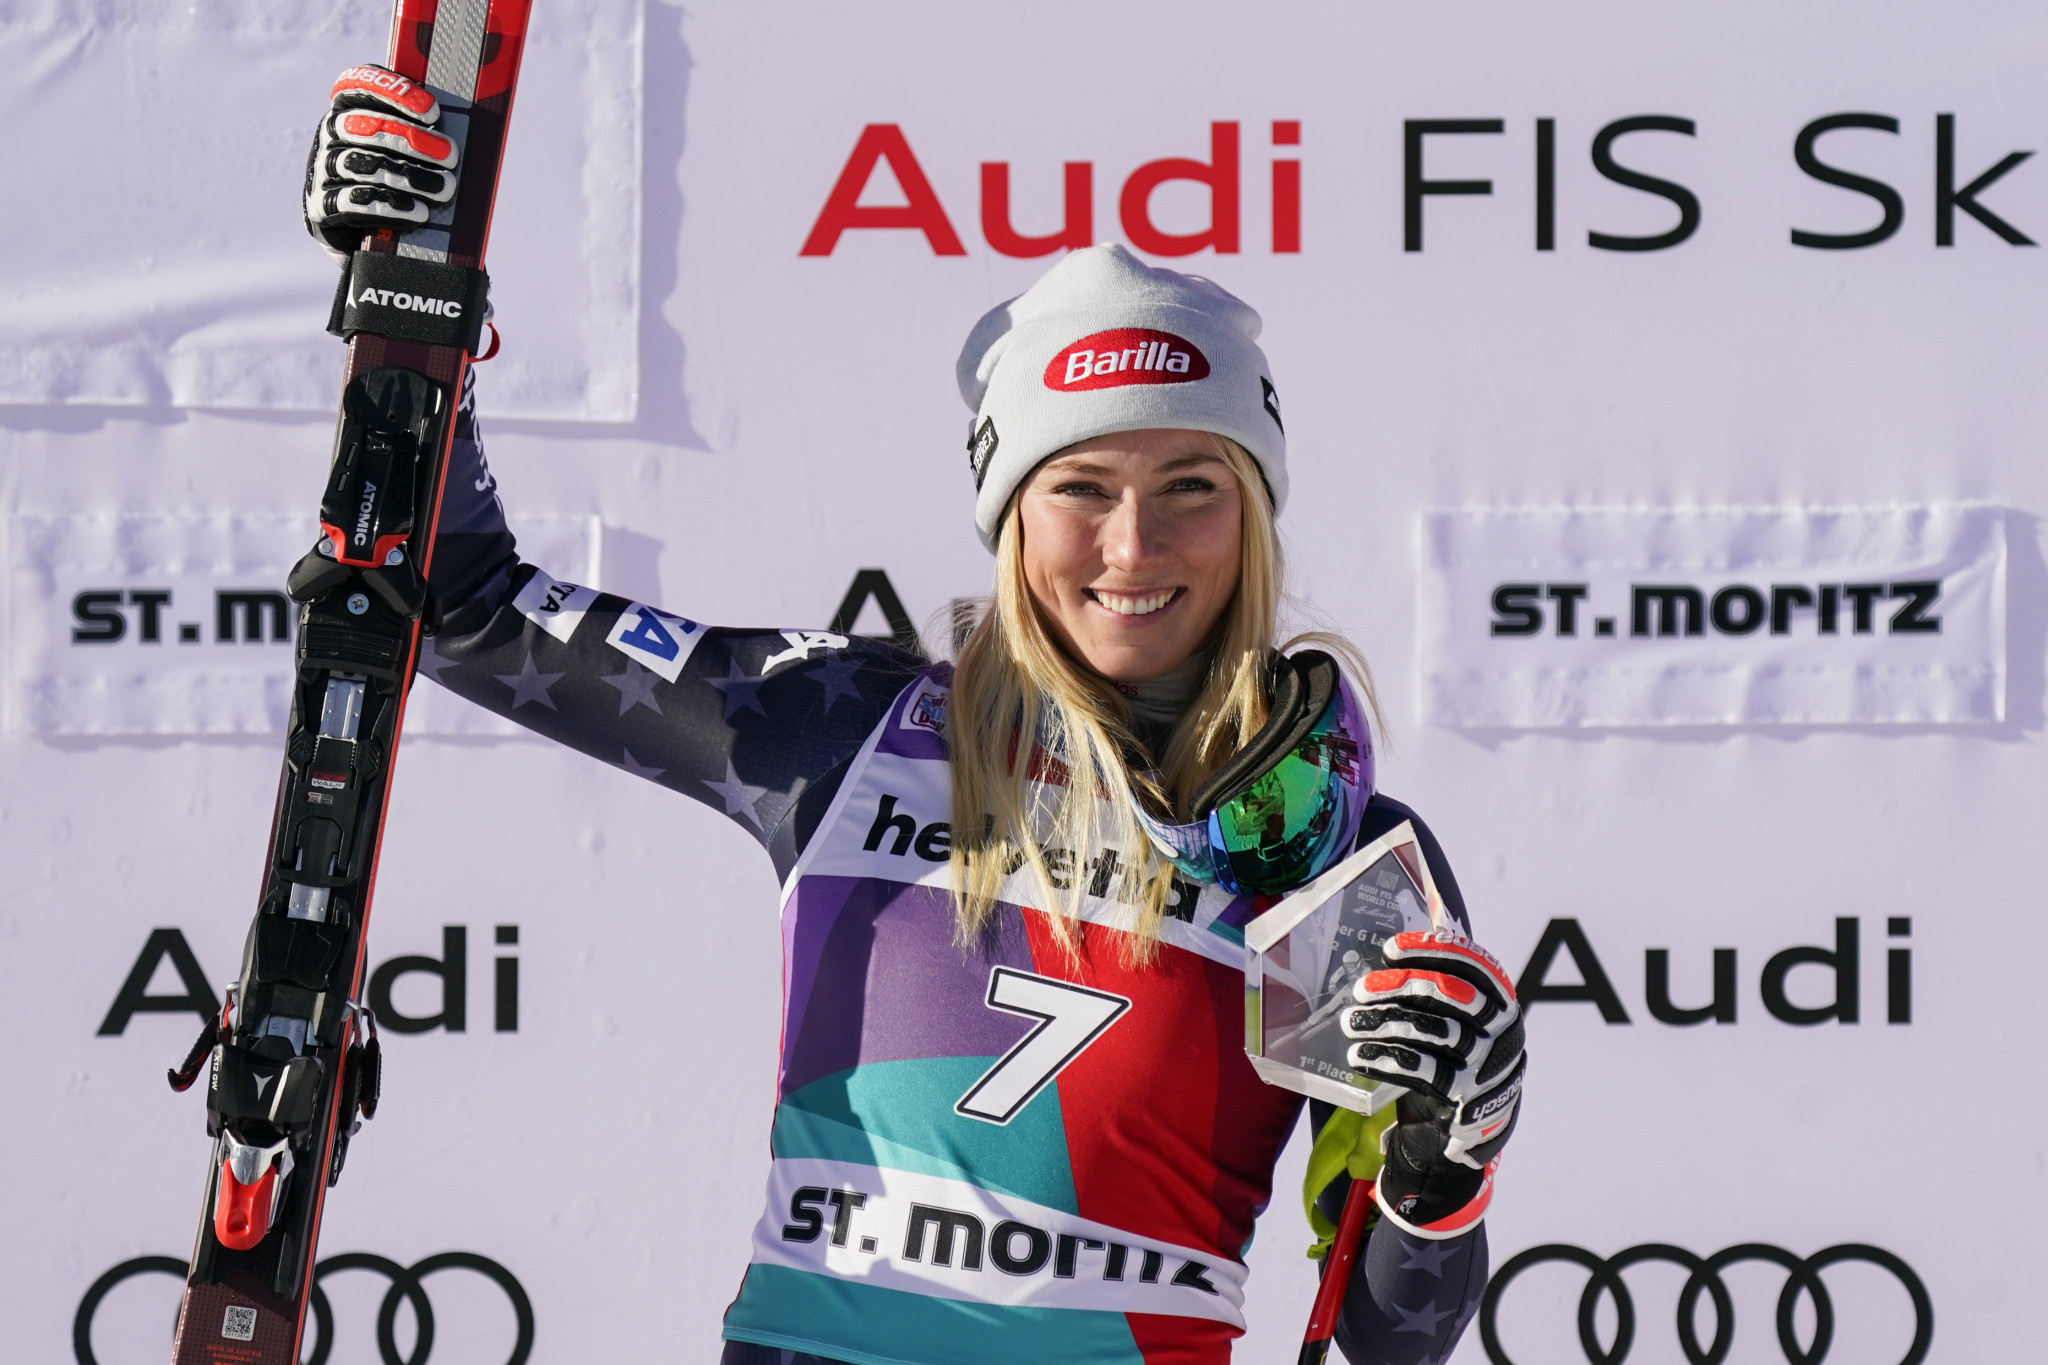 Shiffrin closes in on Alpine Ski World Cup record with St Moritz showing